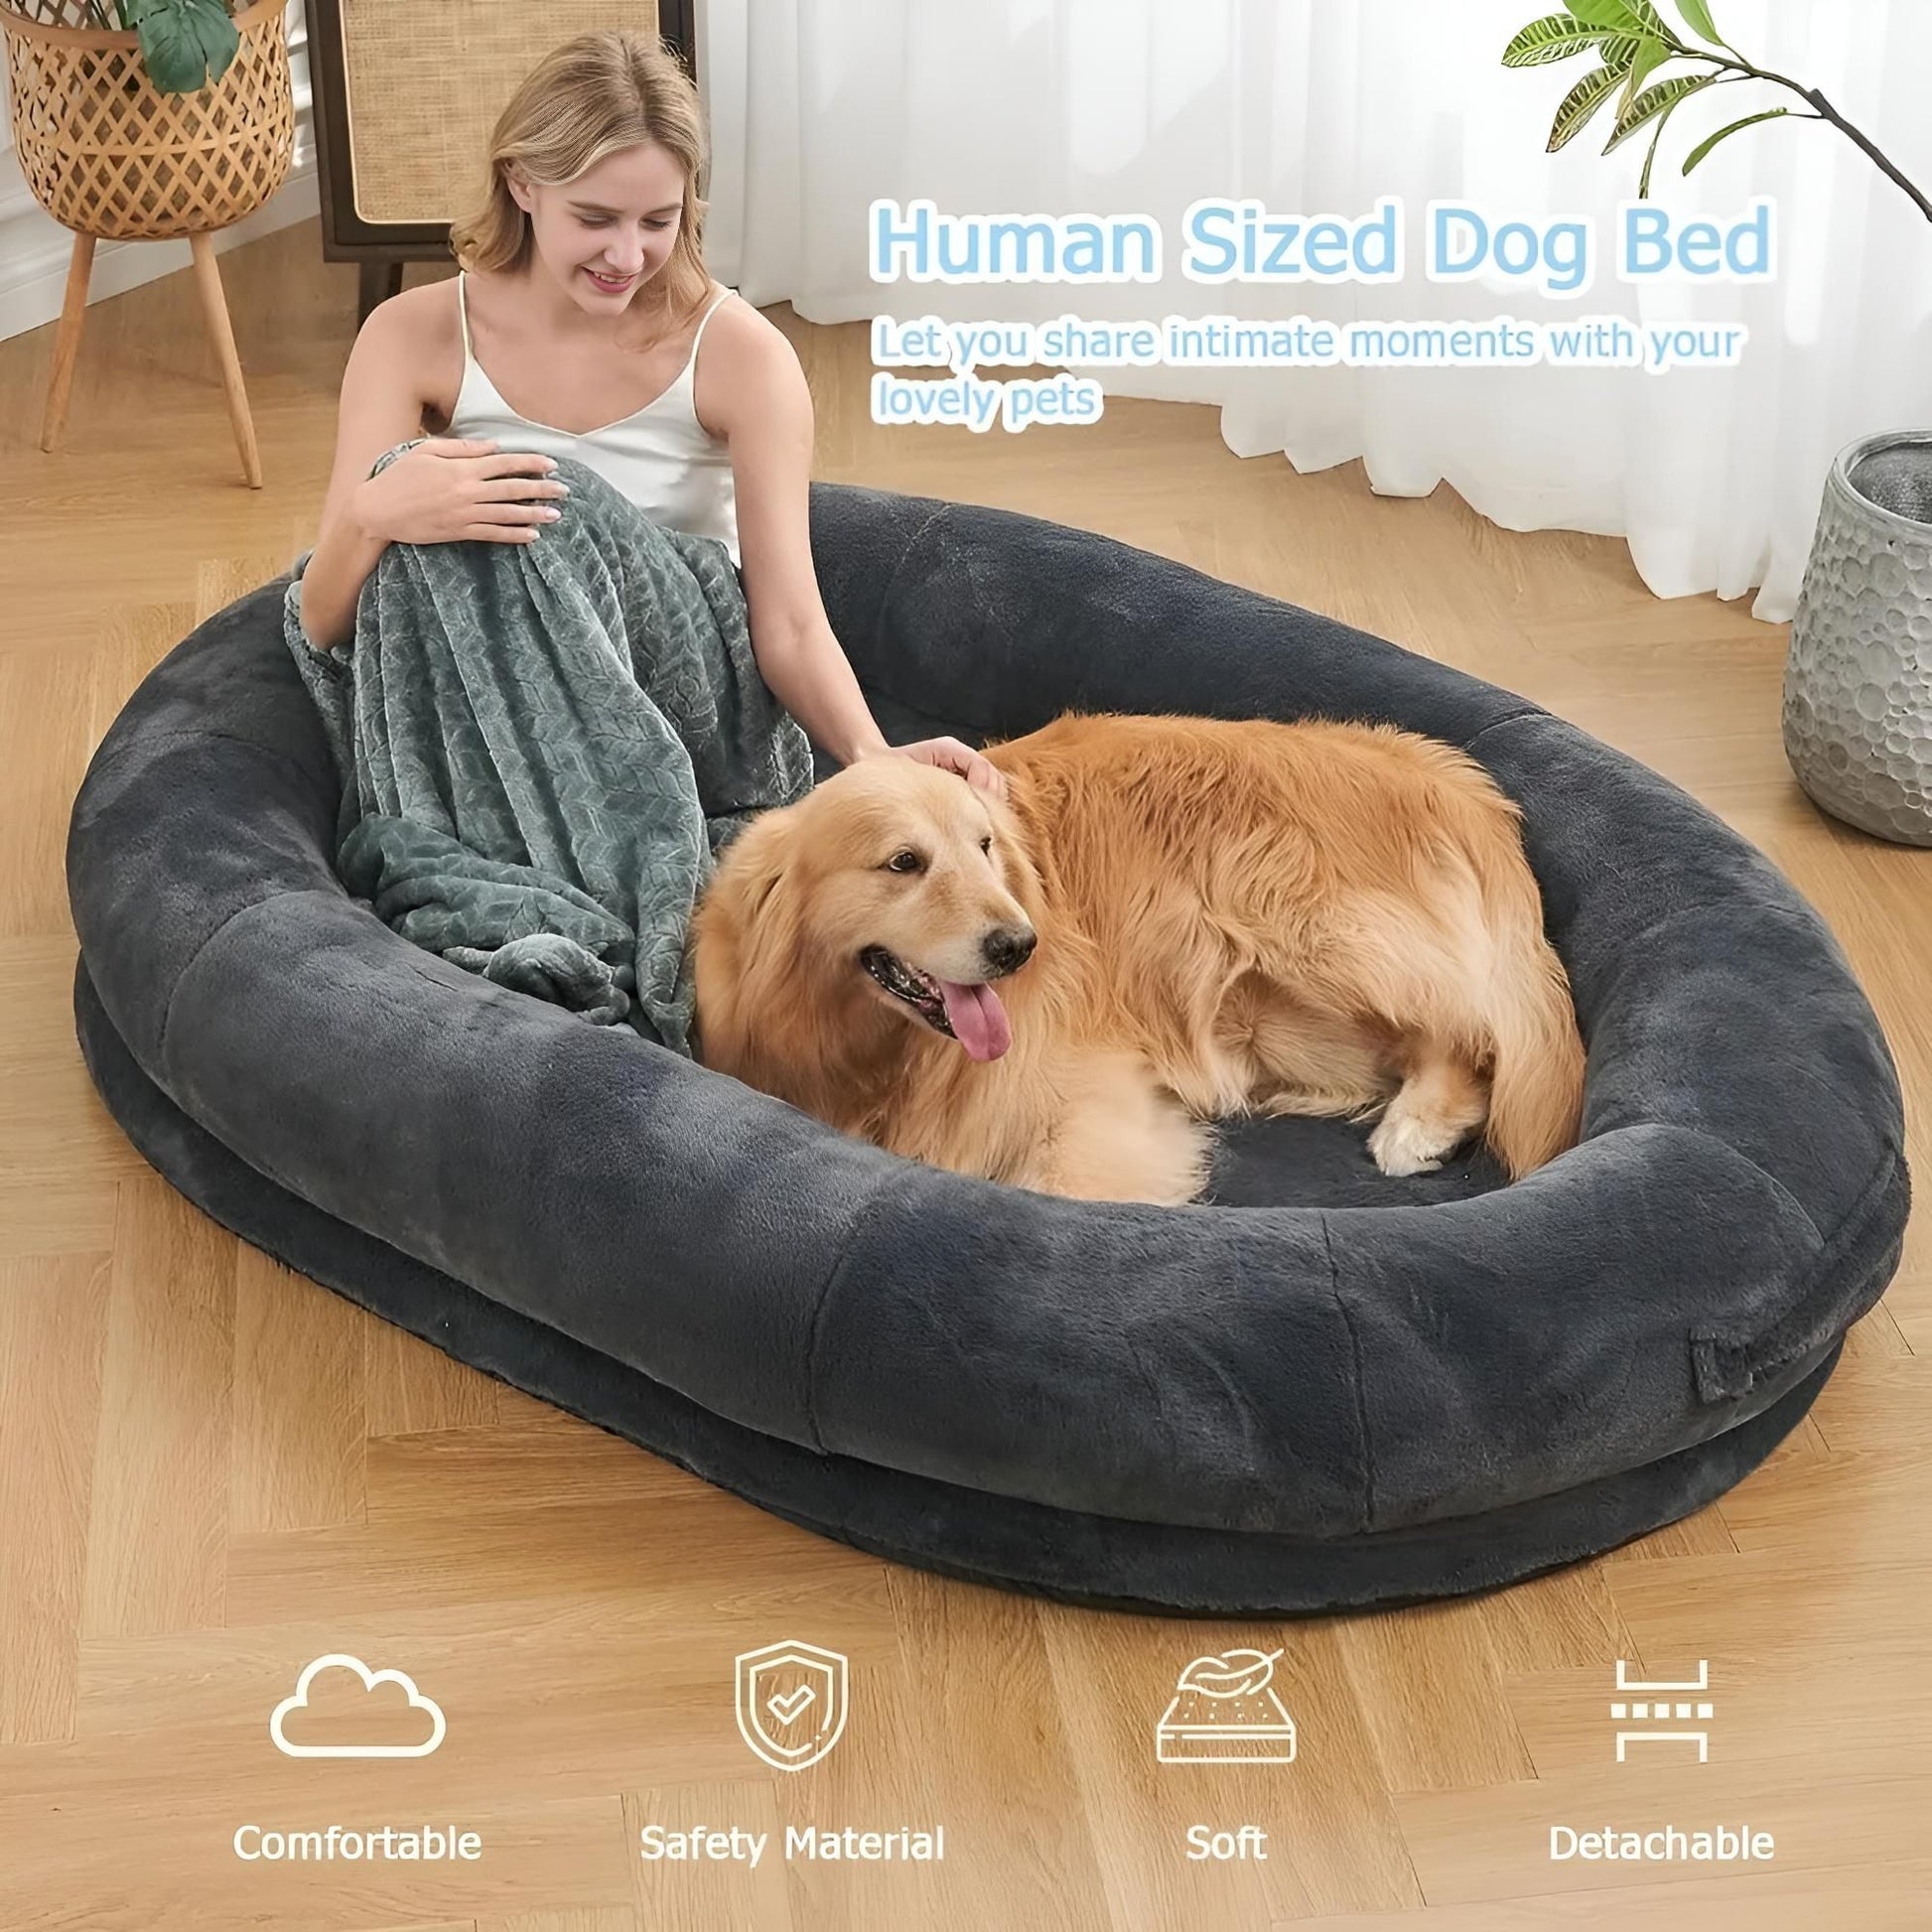 giant dog bed for human